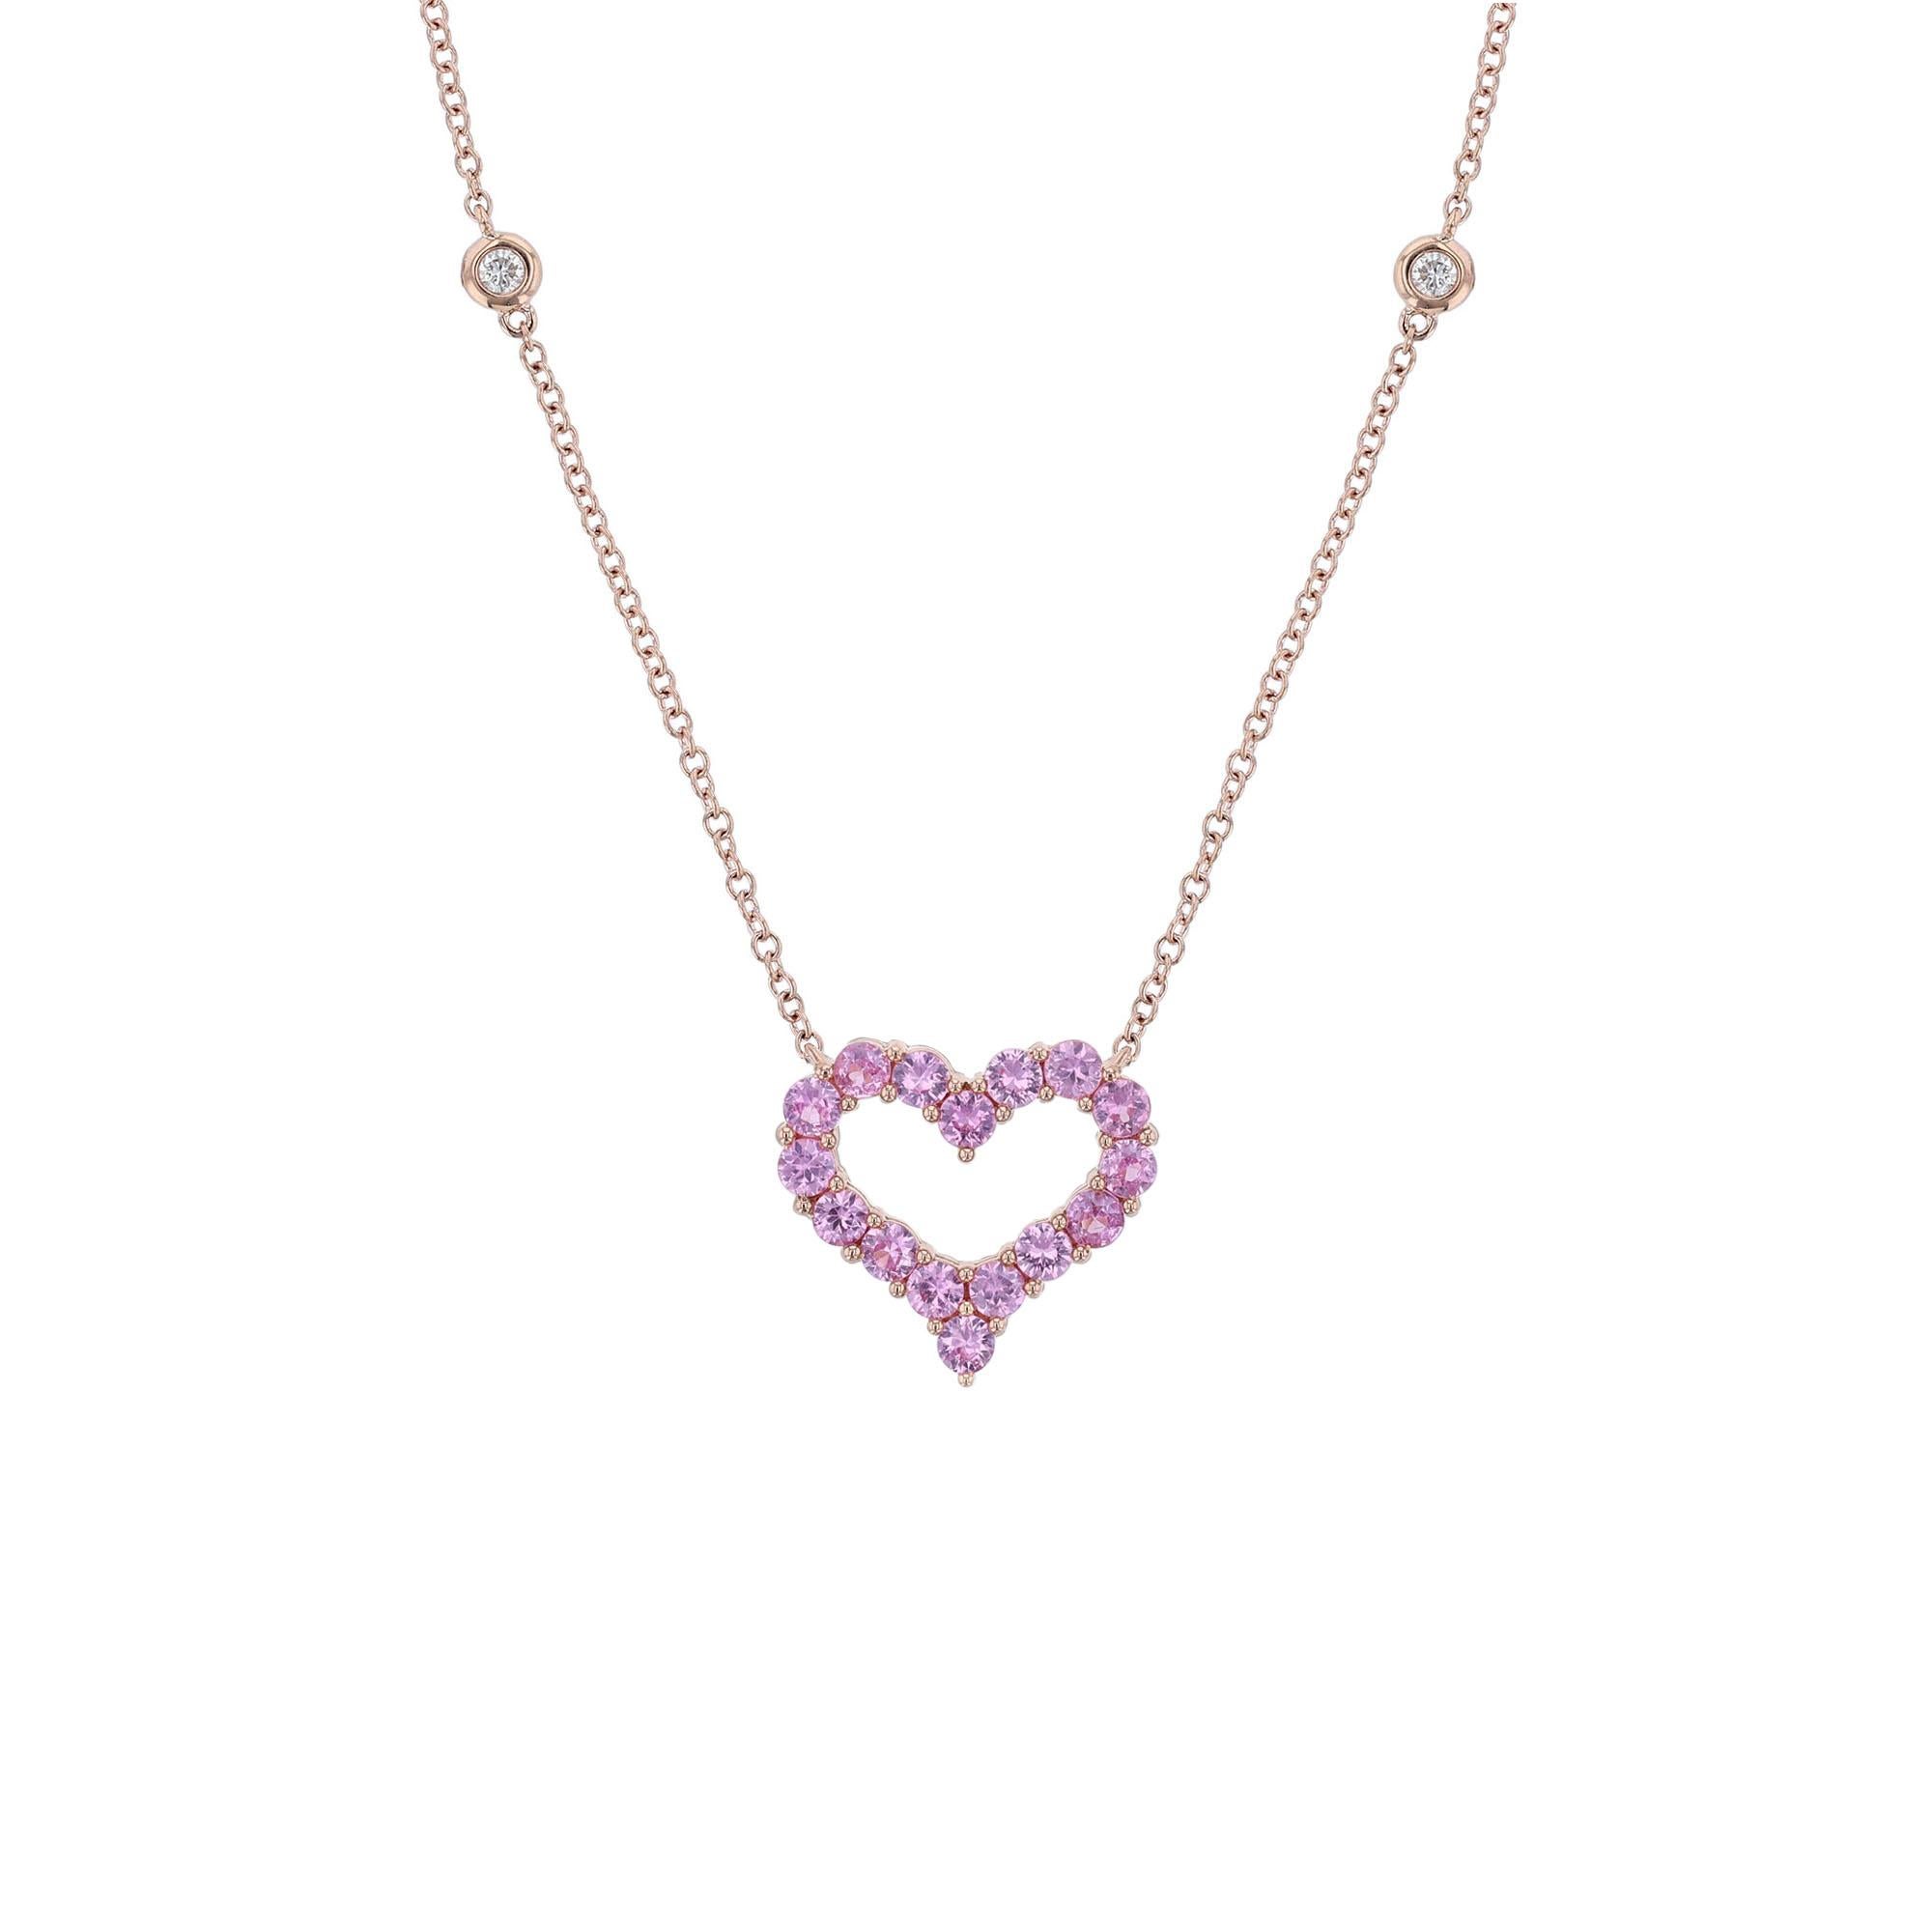 This pendant necklace is made in 18K rose gold. It features a heart shape pendant with 16 round cut, prong set pink sapphires. With 2 round cut, bezel diamond stations, and 2 pink sapphires bezel stations. The necklace has a color grade (H) and